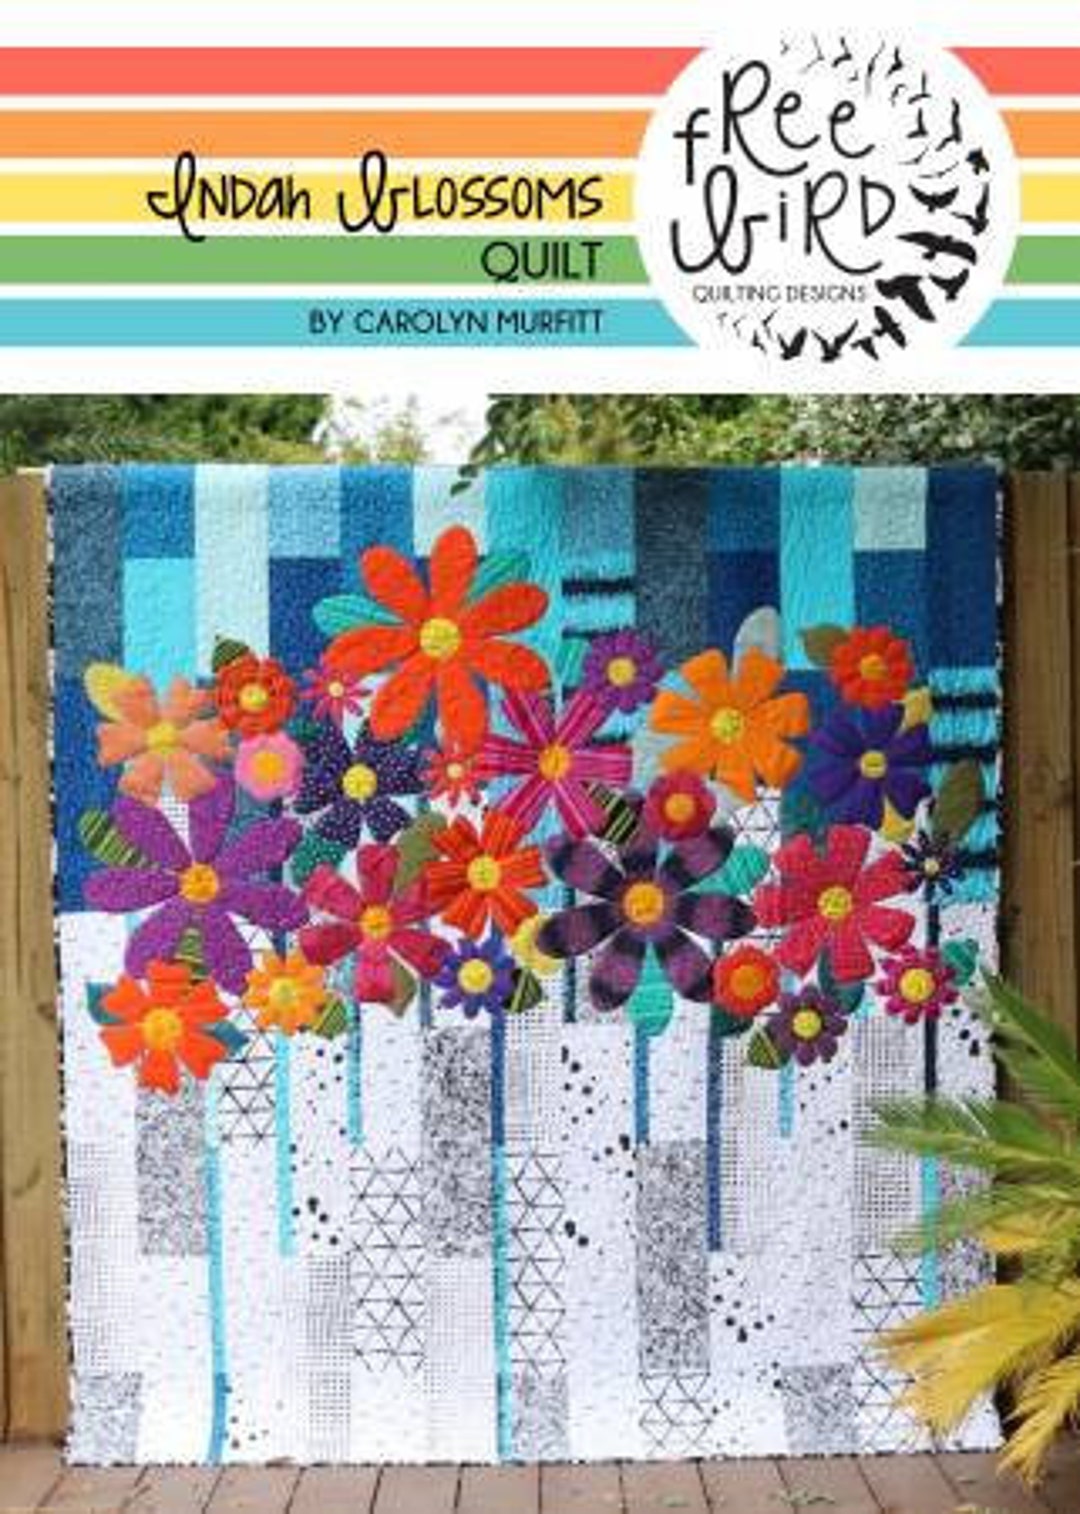 Indah Blossoms Quilt Pattern by Carolyn Murfit From Free Bird - Etsy